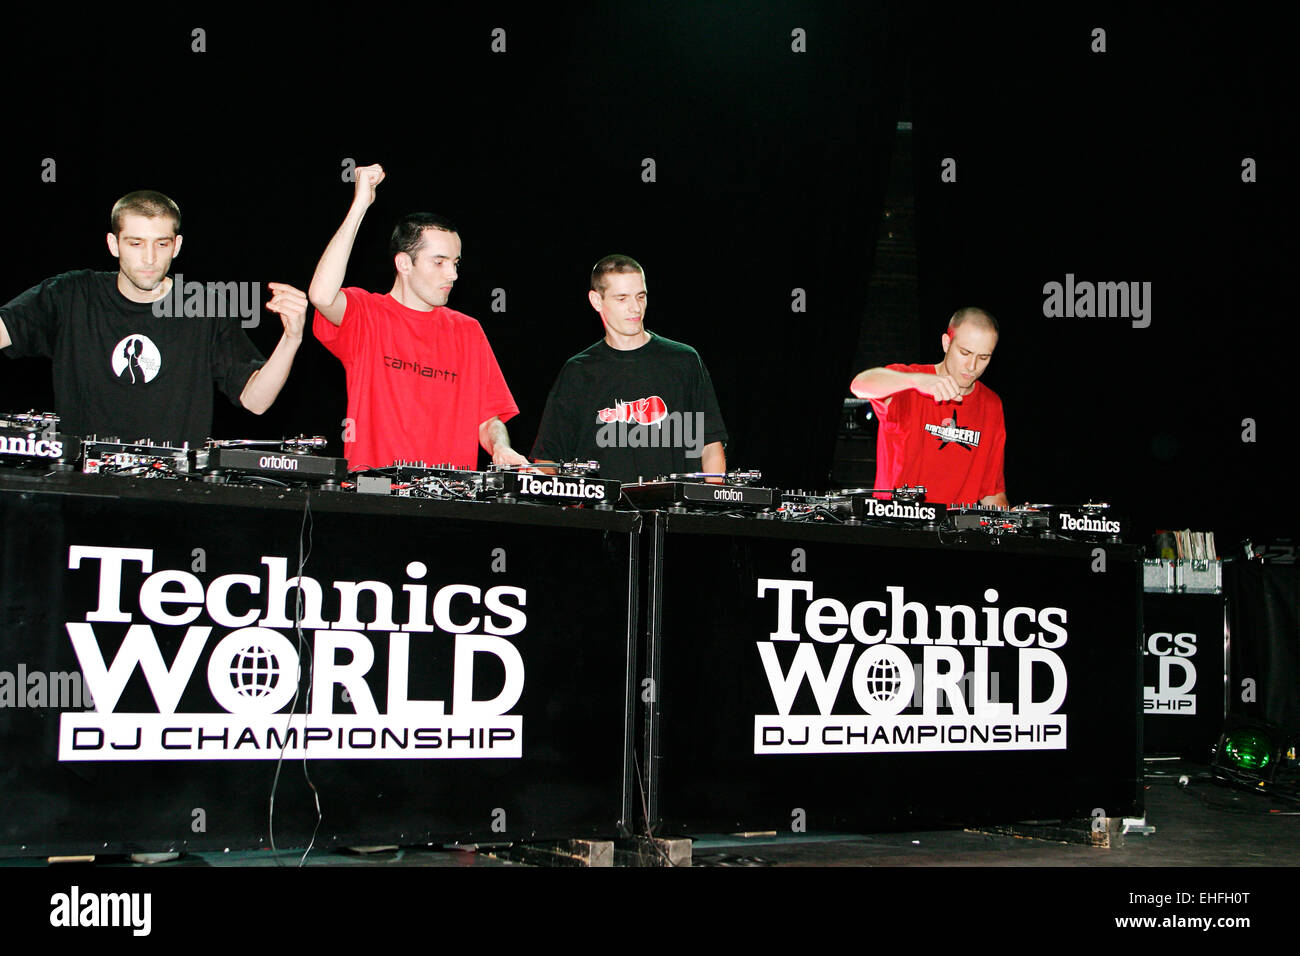 C2C from France winners of the Team Championships at the DMC/Technics World DJ Championships at Hammersmith Apollo. Stock Photo